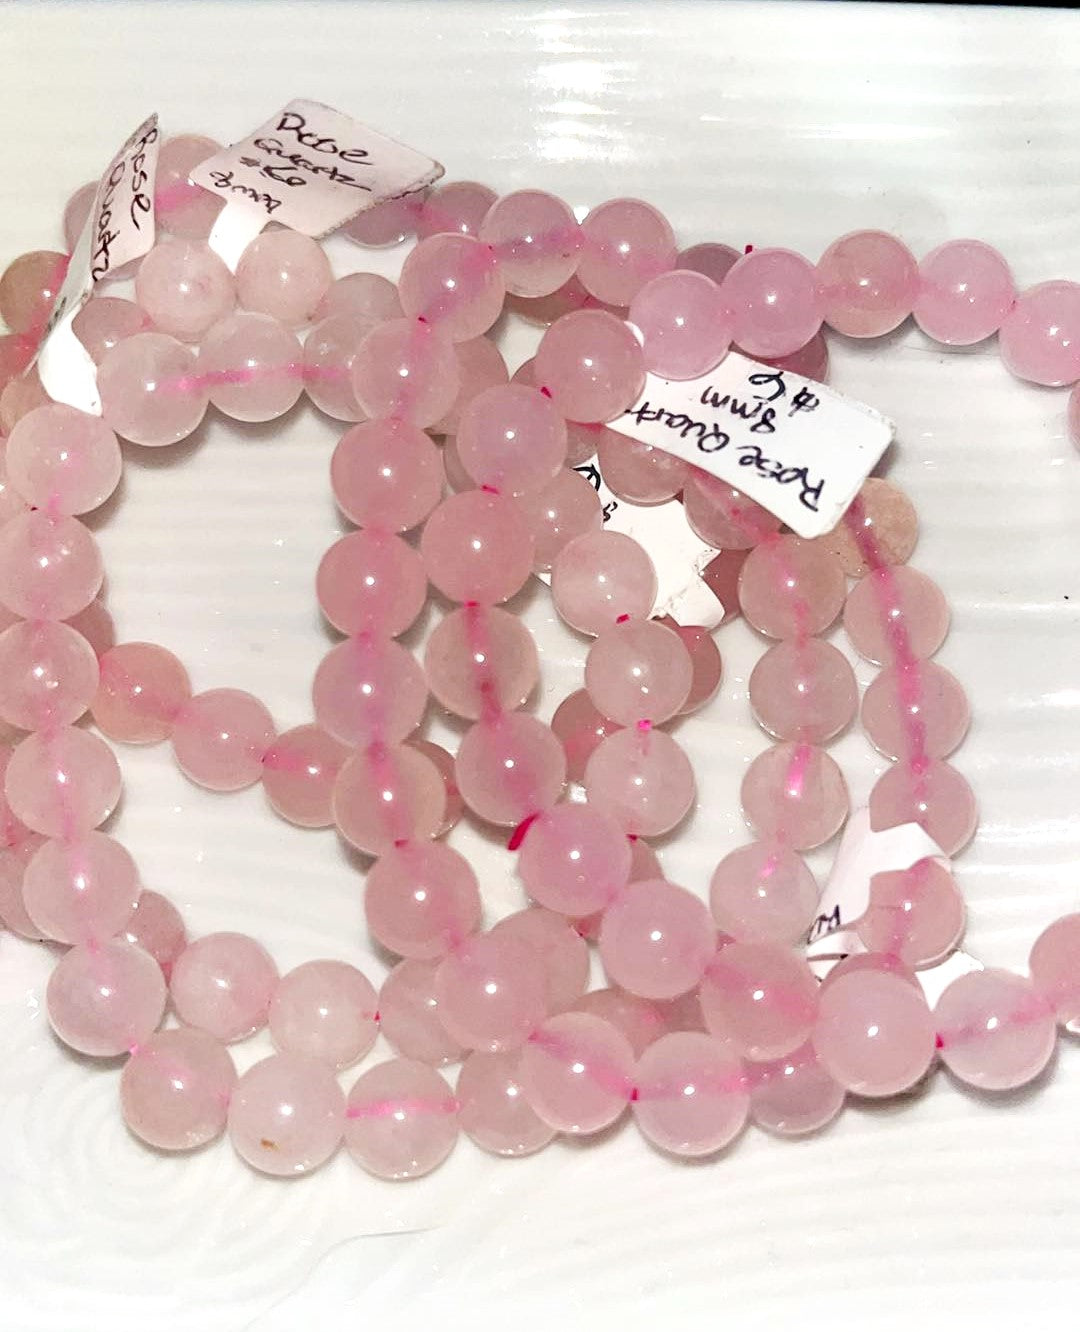 Rose Quartz 8mm Crystal Bracelet. Radiate Love, emotional healing, compassion, feeling unconditional love and harmony